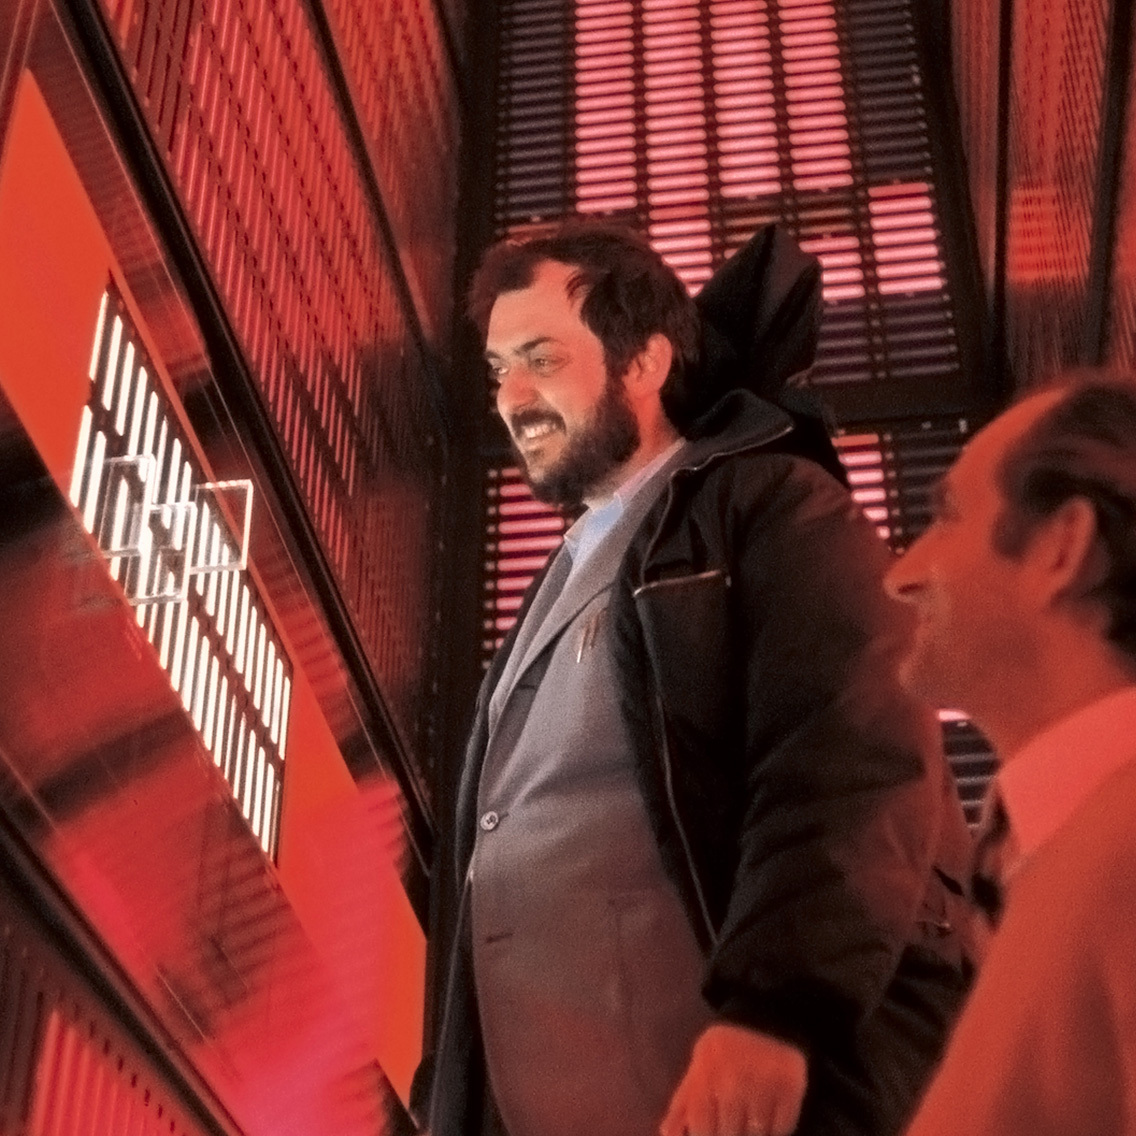 Episode 2, Stanley Kubrick and the relationship man-machine